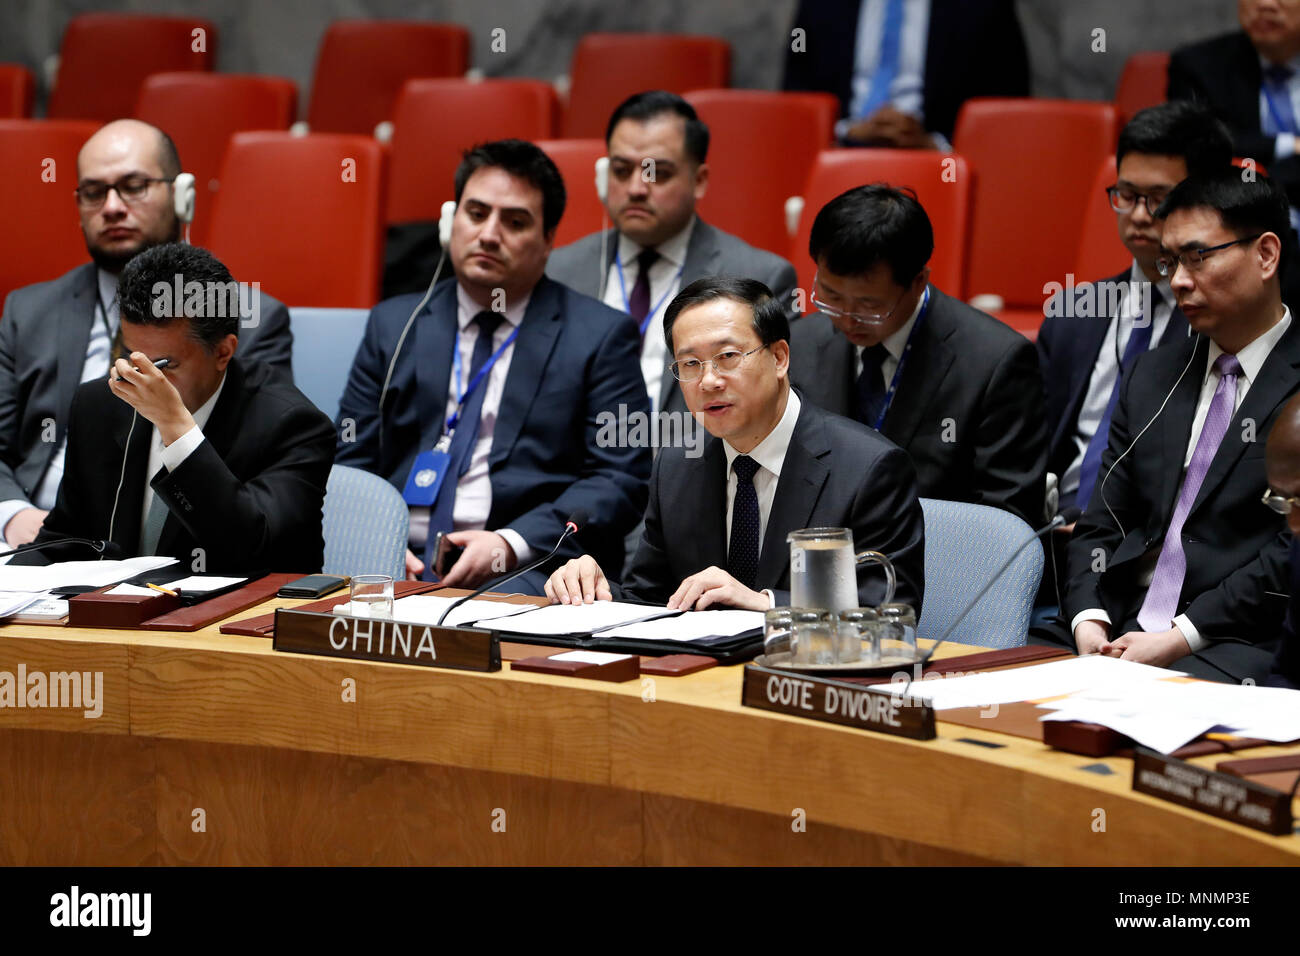 (180519) -- UNITED NATIONS, May 19, 2018 (Xinhua) -- Chinese ambassador to the United Nations (UN) Ma Zhaoxu (1st R, front) speaks at the UN Security Council high-level open debate on upholding international law for world peace and security, at the UN headquarters in New York, on May 17, 2018. While concerns about the authority and mandated duties of the UN Security Council were raised at a high-level open debate on Thursday, China threw its considerable weight behind it, one of the six UN principal organs for maintaining international peace and security. (Xinhua/Li Muzi) (sxk) Stock Photo